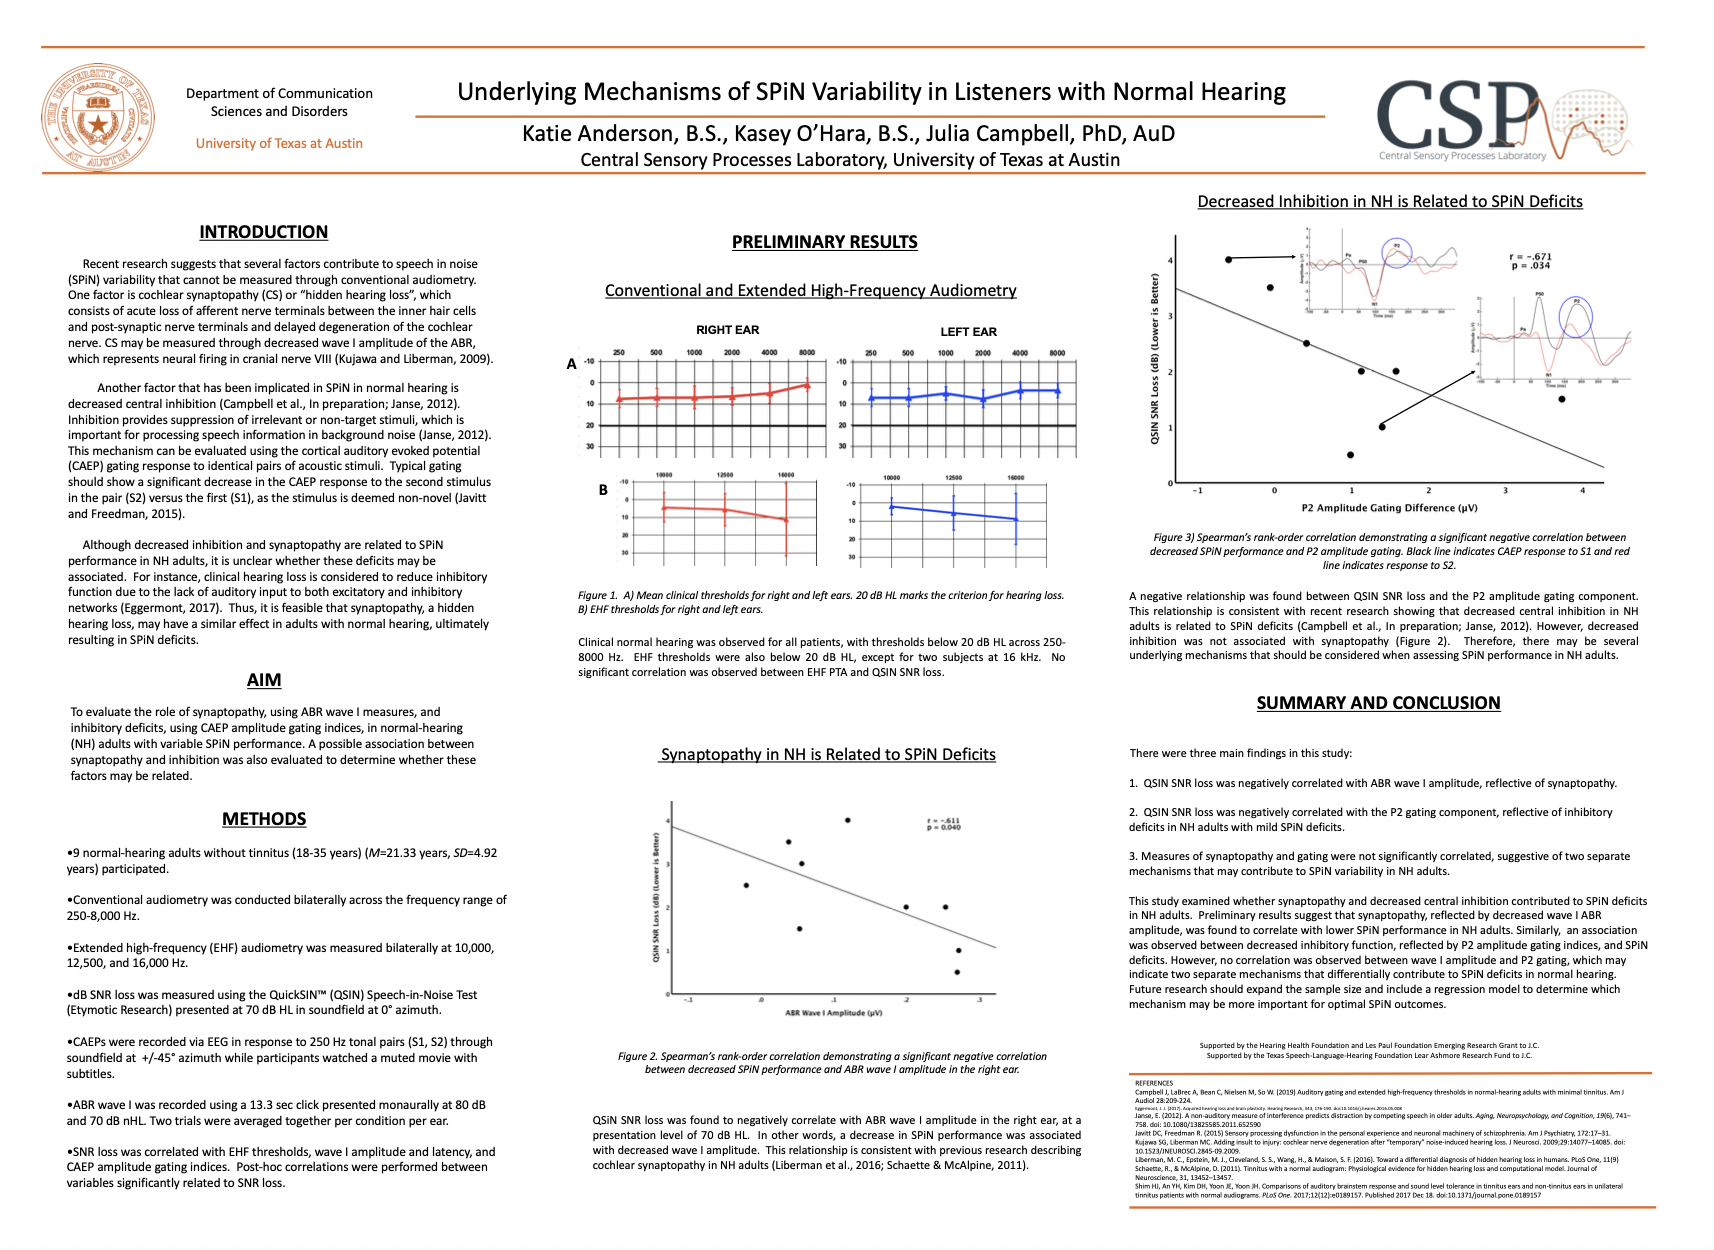 Research poster by Anderson et al 